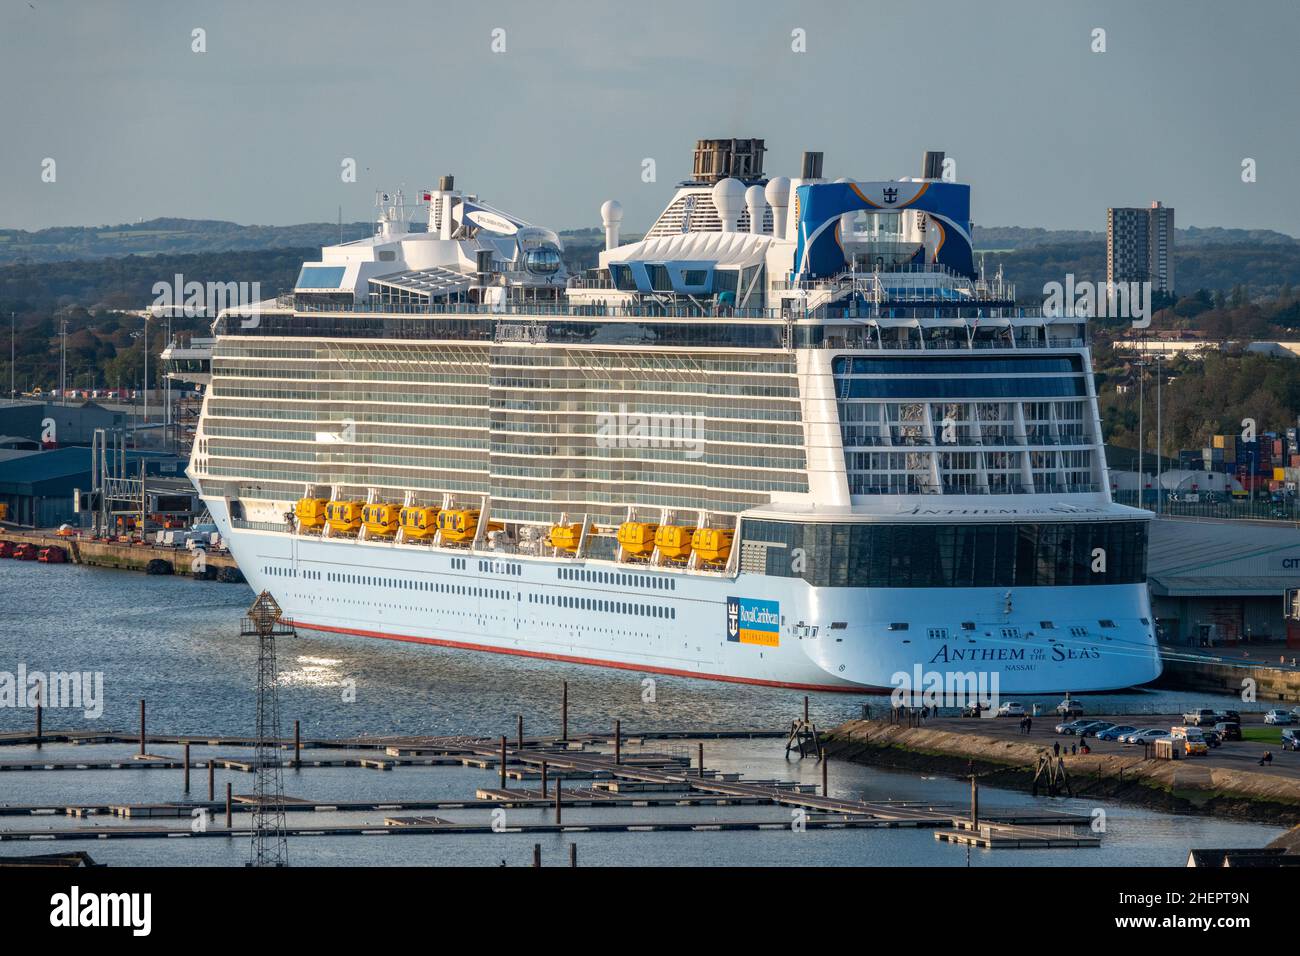 The Royal Caribbean vessel ANTHEM OF THE SEAS berthed in the port of Southampton, UK Stock Photo